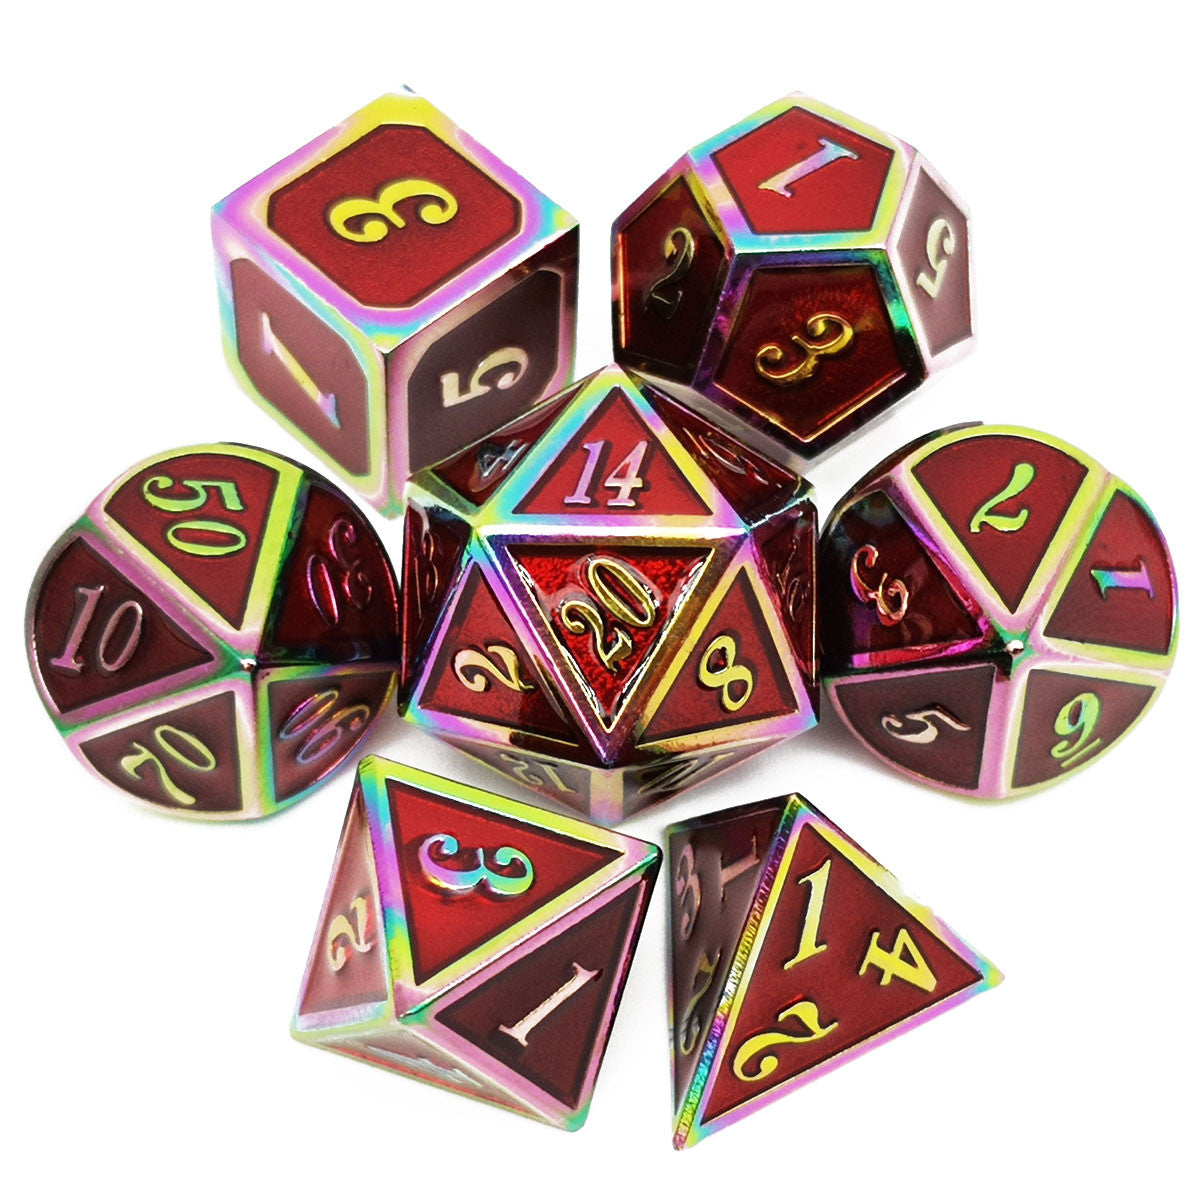 rainbow metal dice for dnd dice games